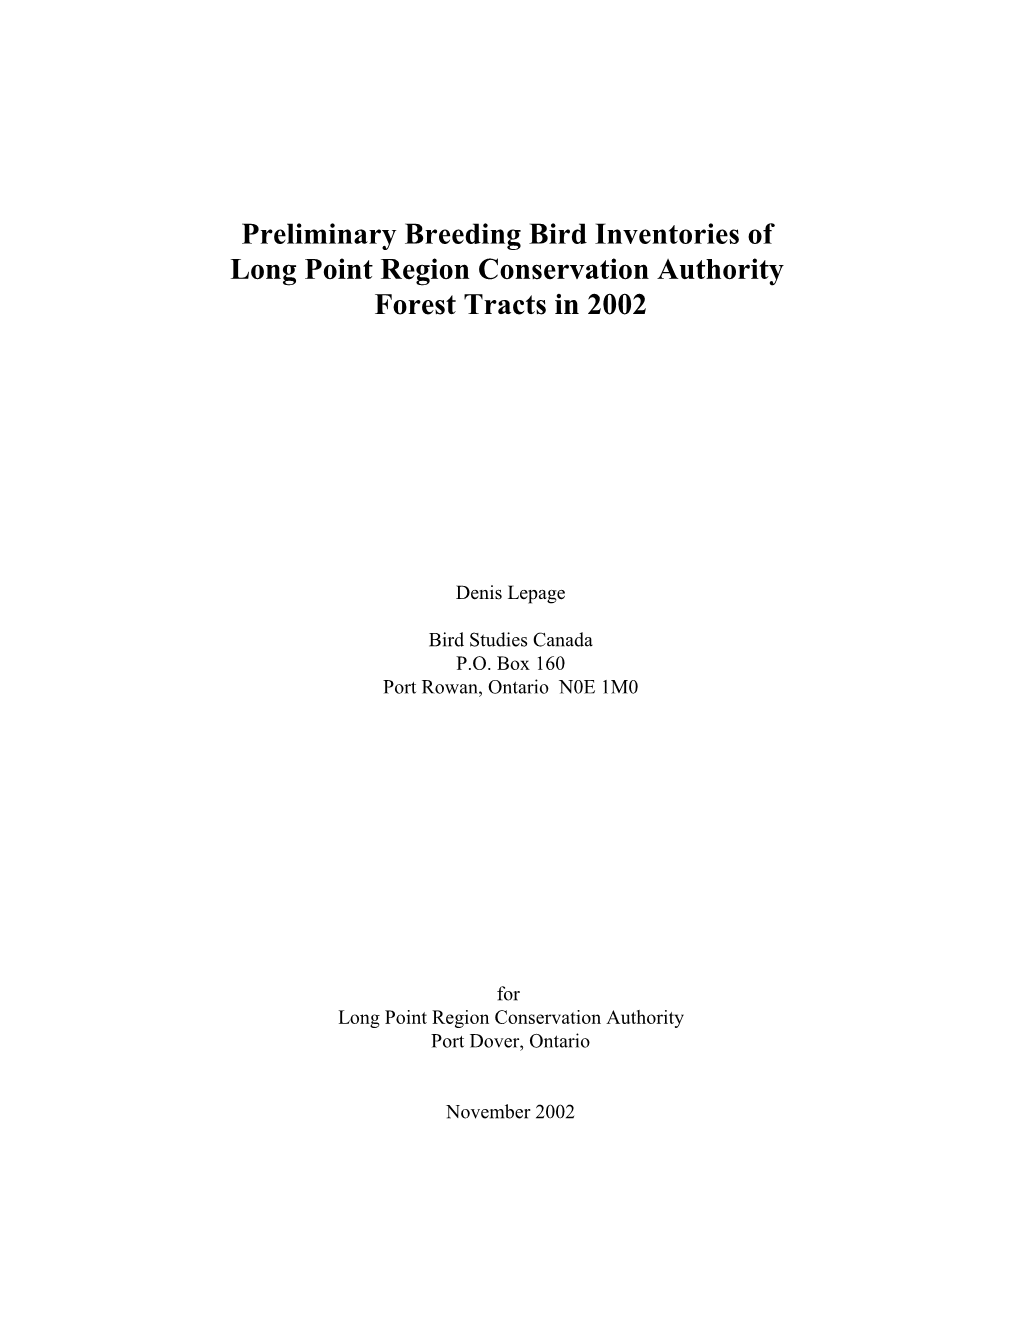 Preliminary Breeding Bird Inventories of Long Point Region Conservation Authority Forest Tracts in 2002